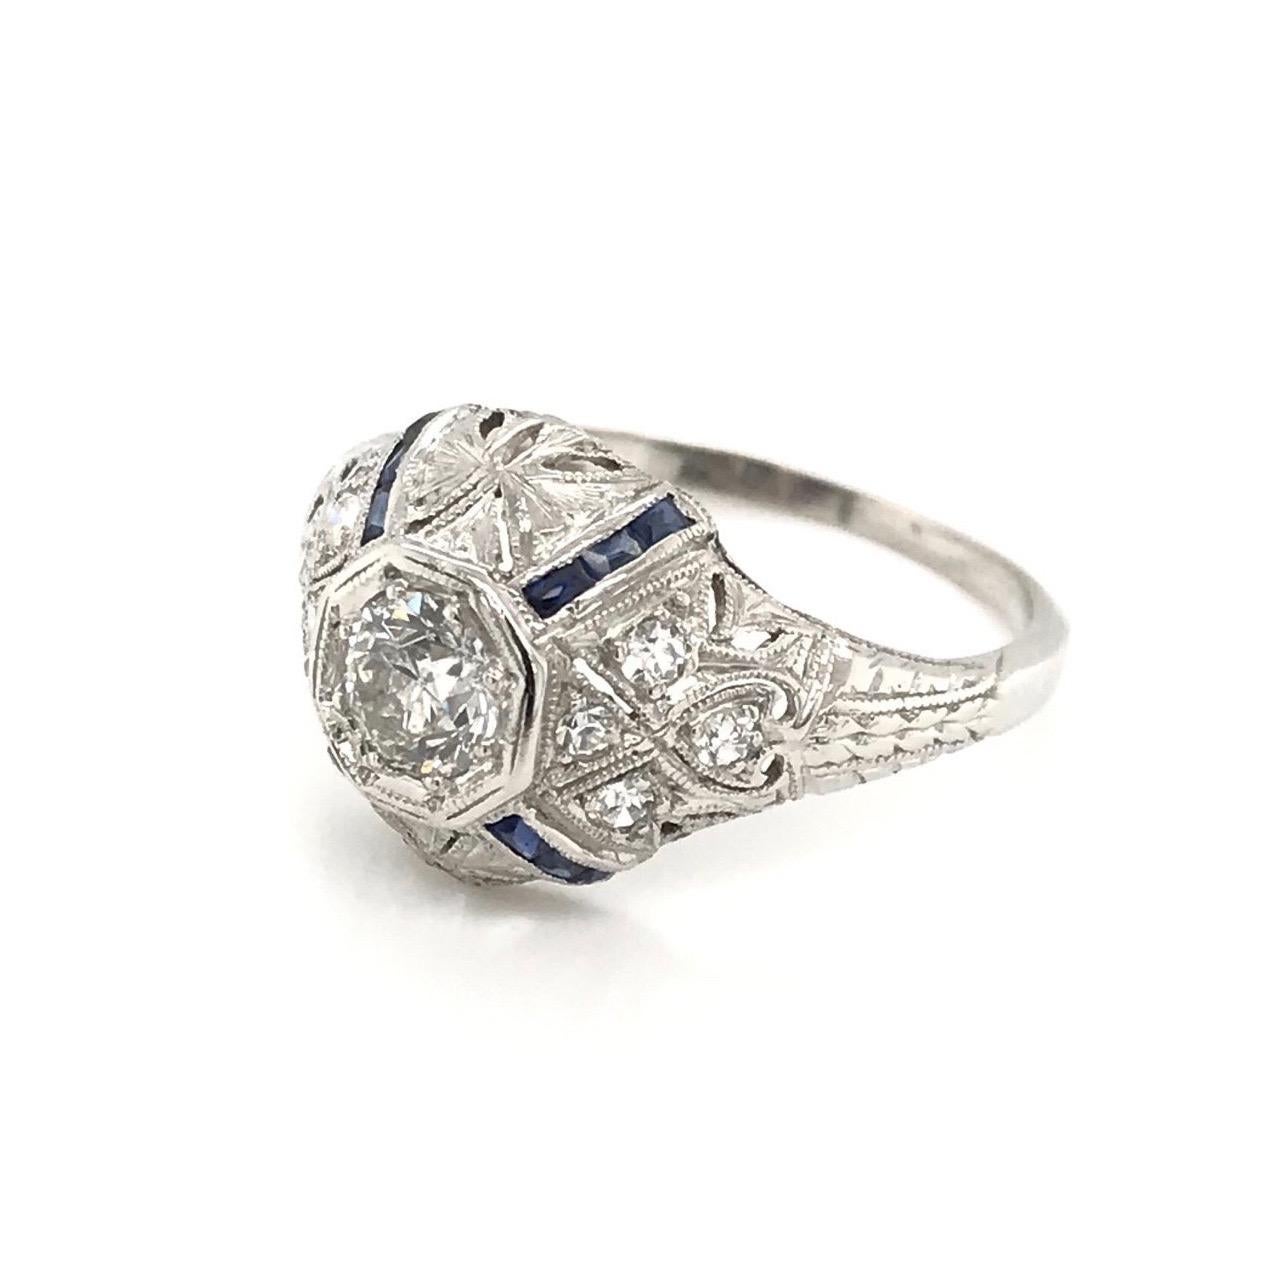 This antique piece was handcrafted sometime during the Art Deco design period ( 1920-1940 ). This ring is quite the exquisite antique jewelry piece! The platinum setting features a 0.33 carat diamond in the center ( one third of one full carat ).